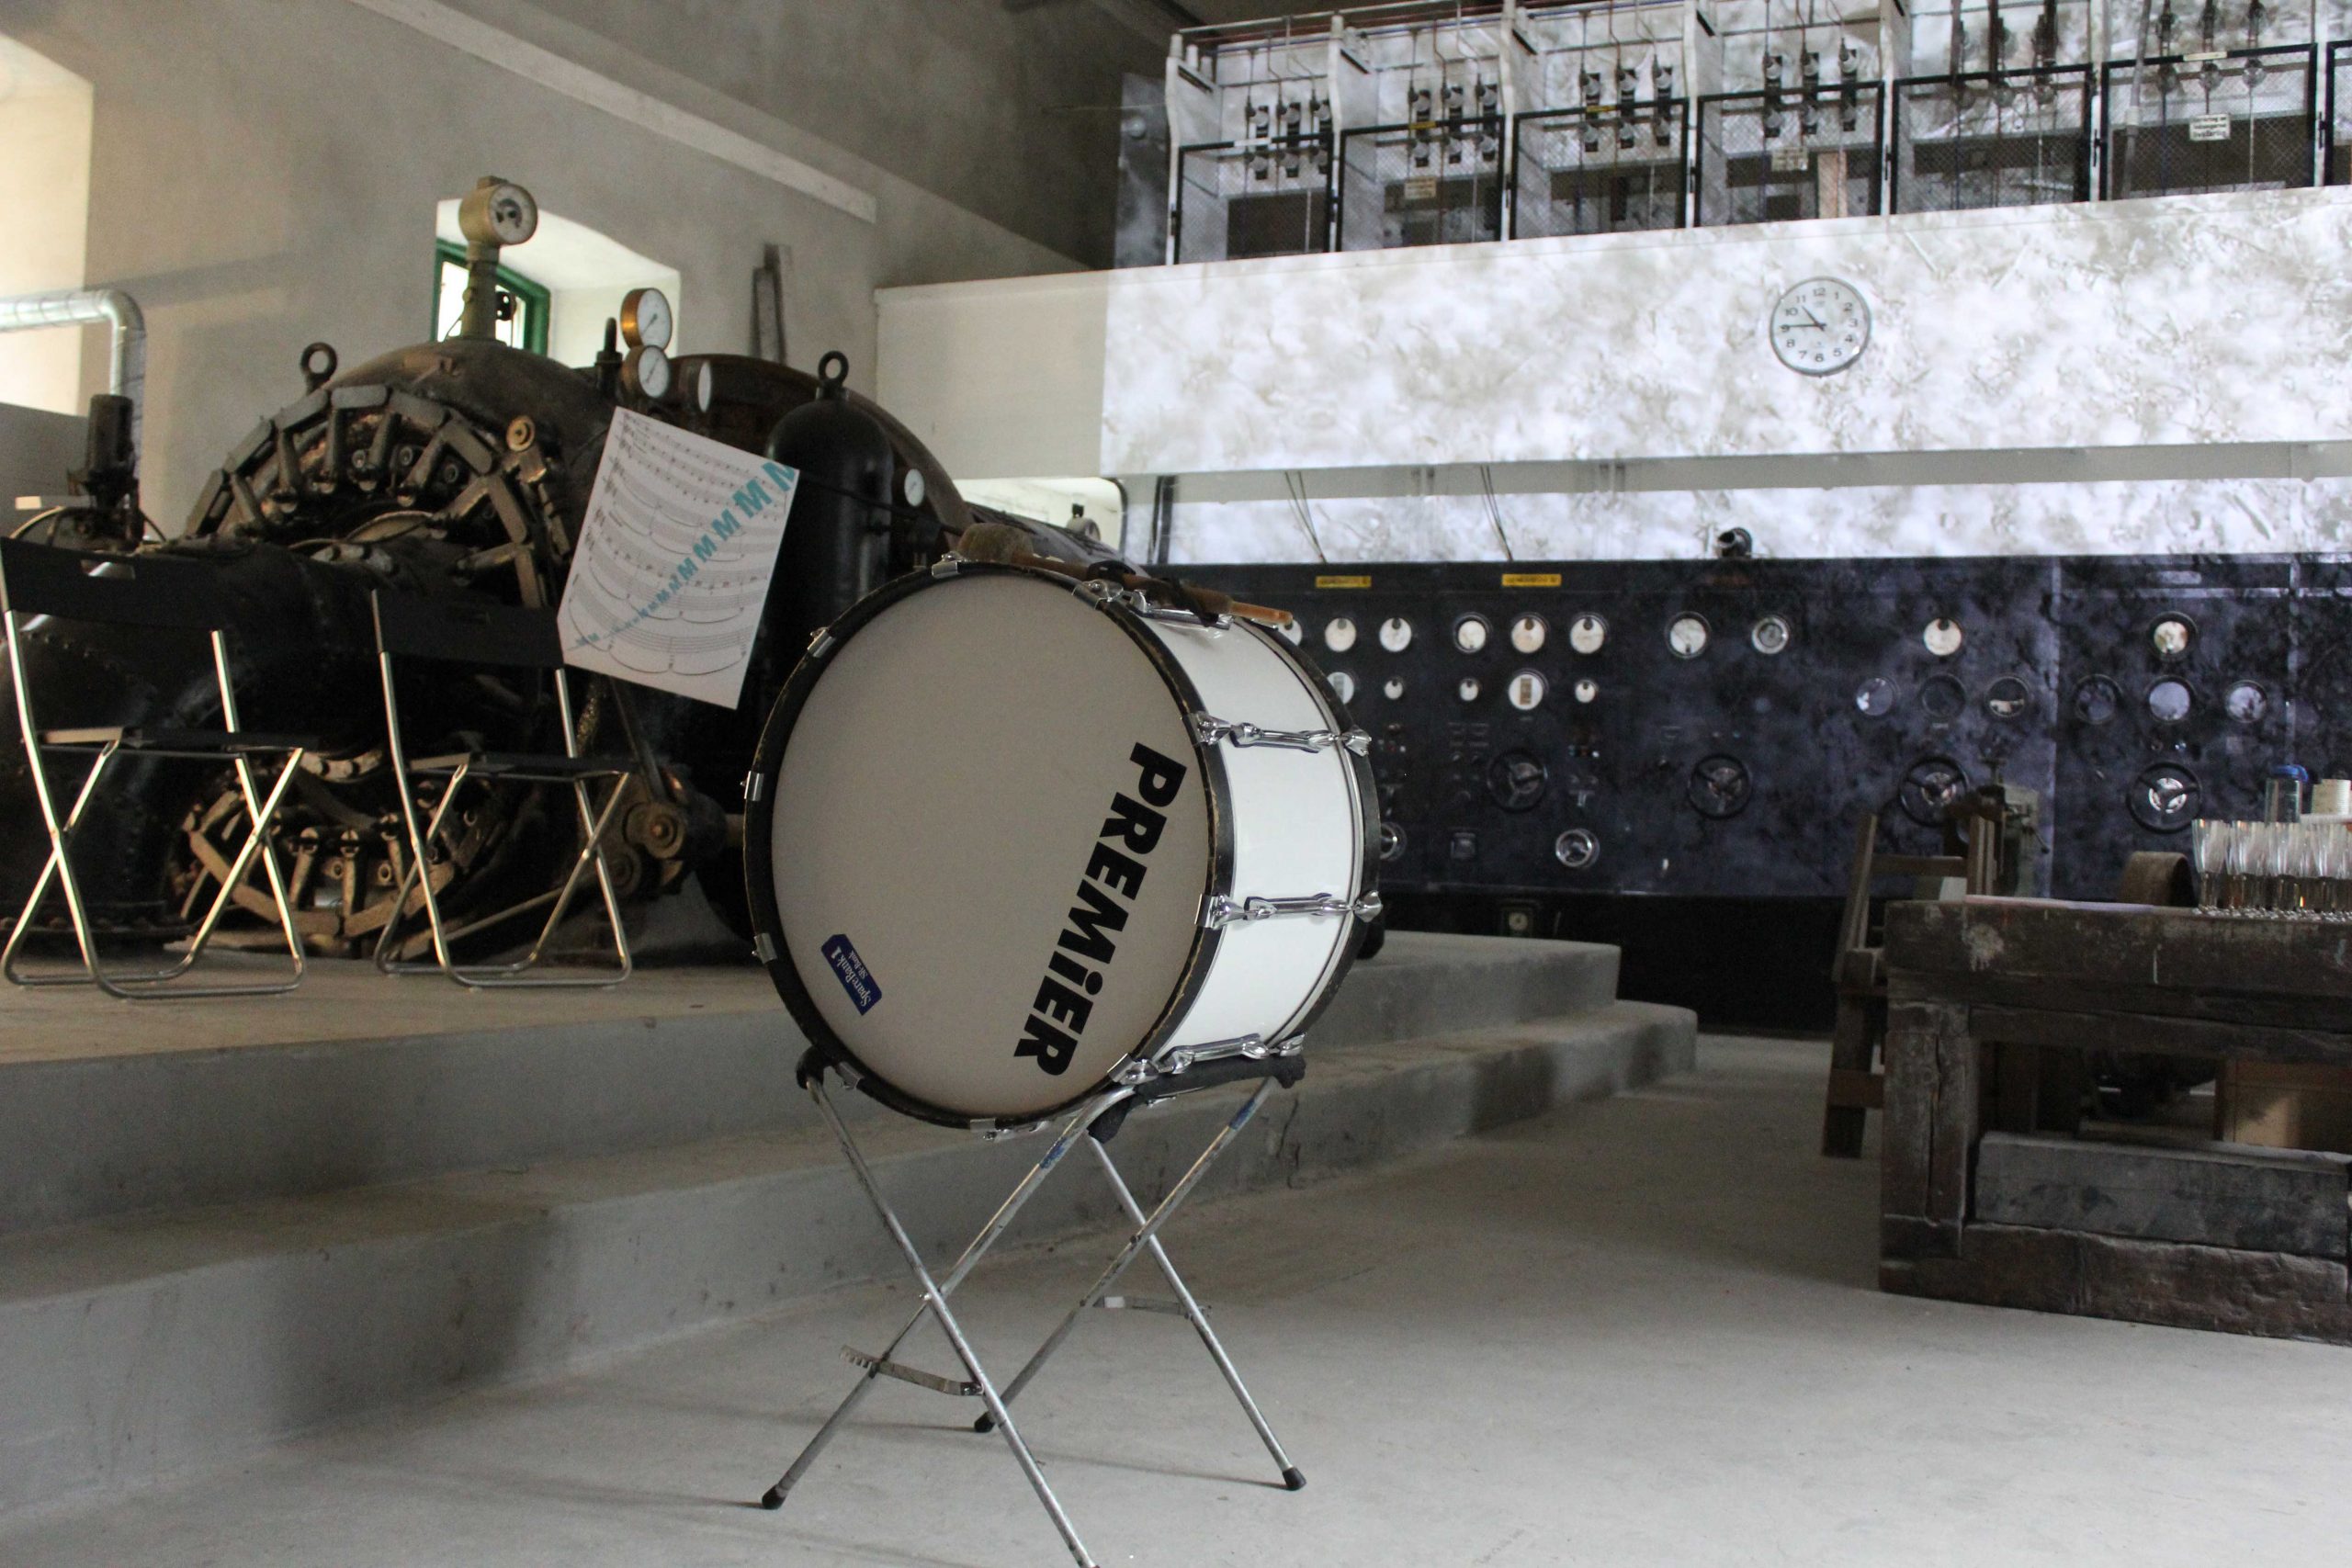 a bass drum on a stand in a room with a projection and equipment in the background